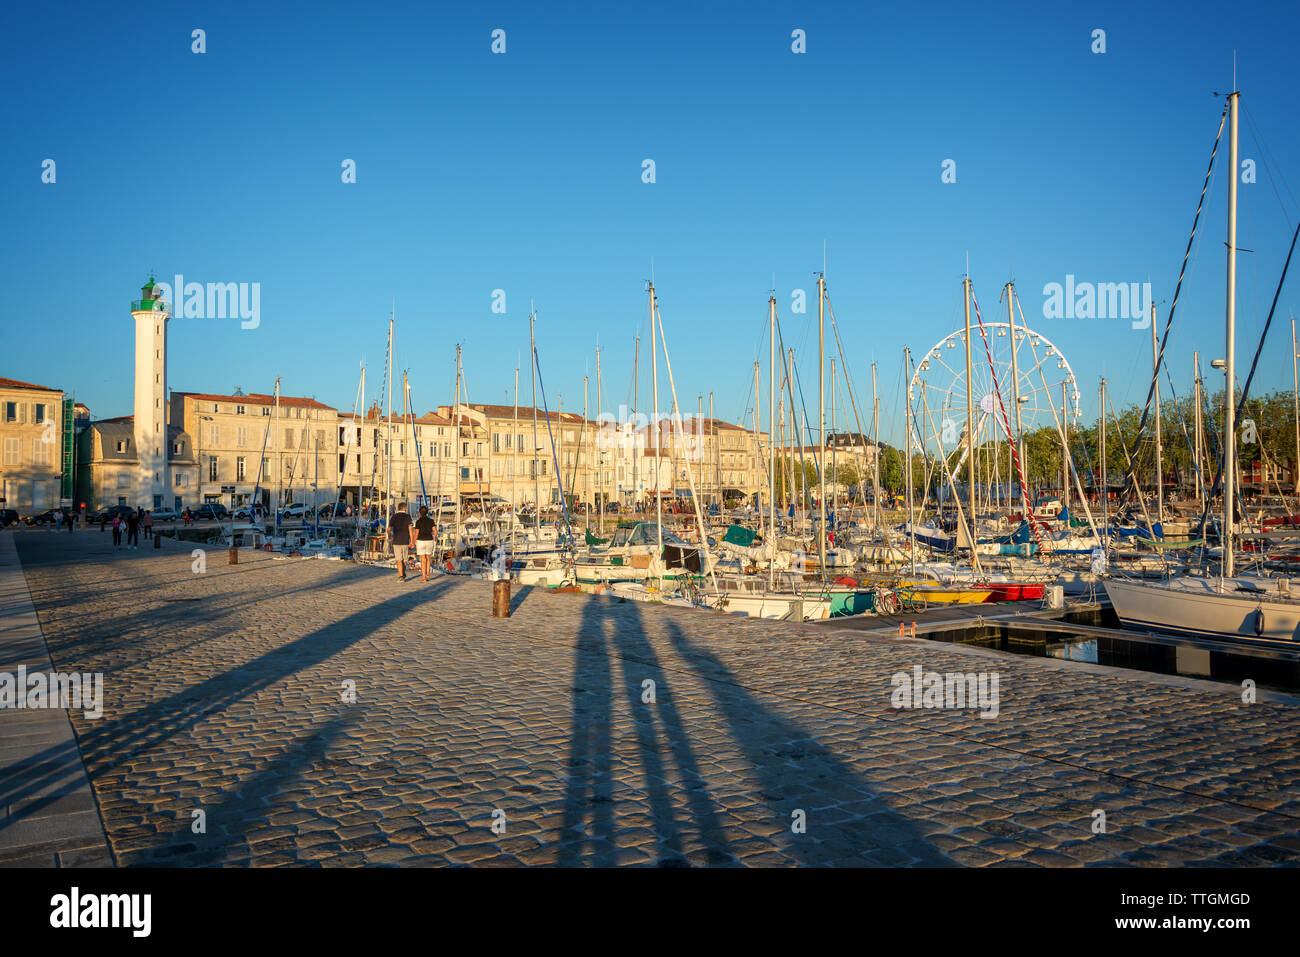 Sailboats in the old harbor of La Rochelle, France at sunset Stock Photo